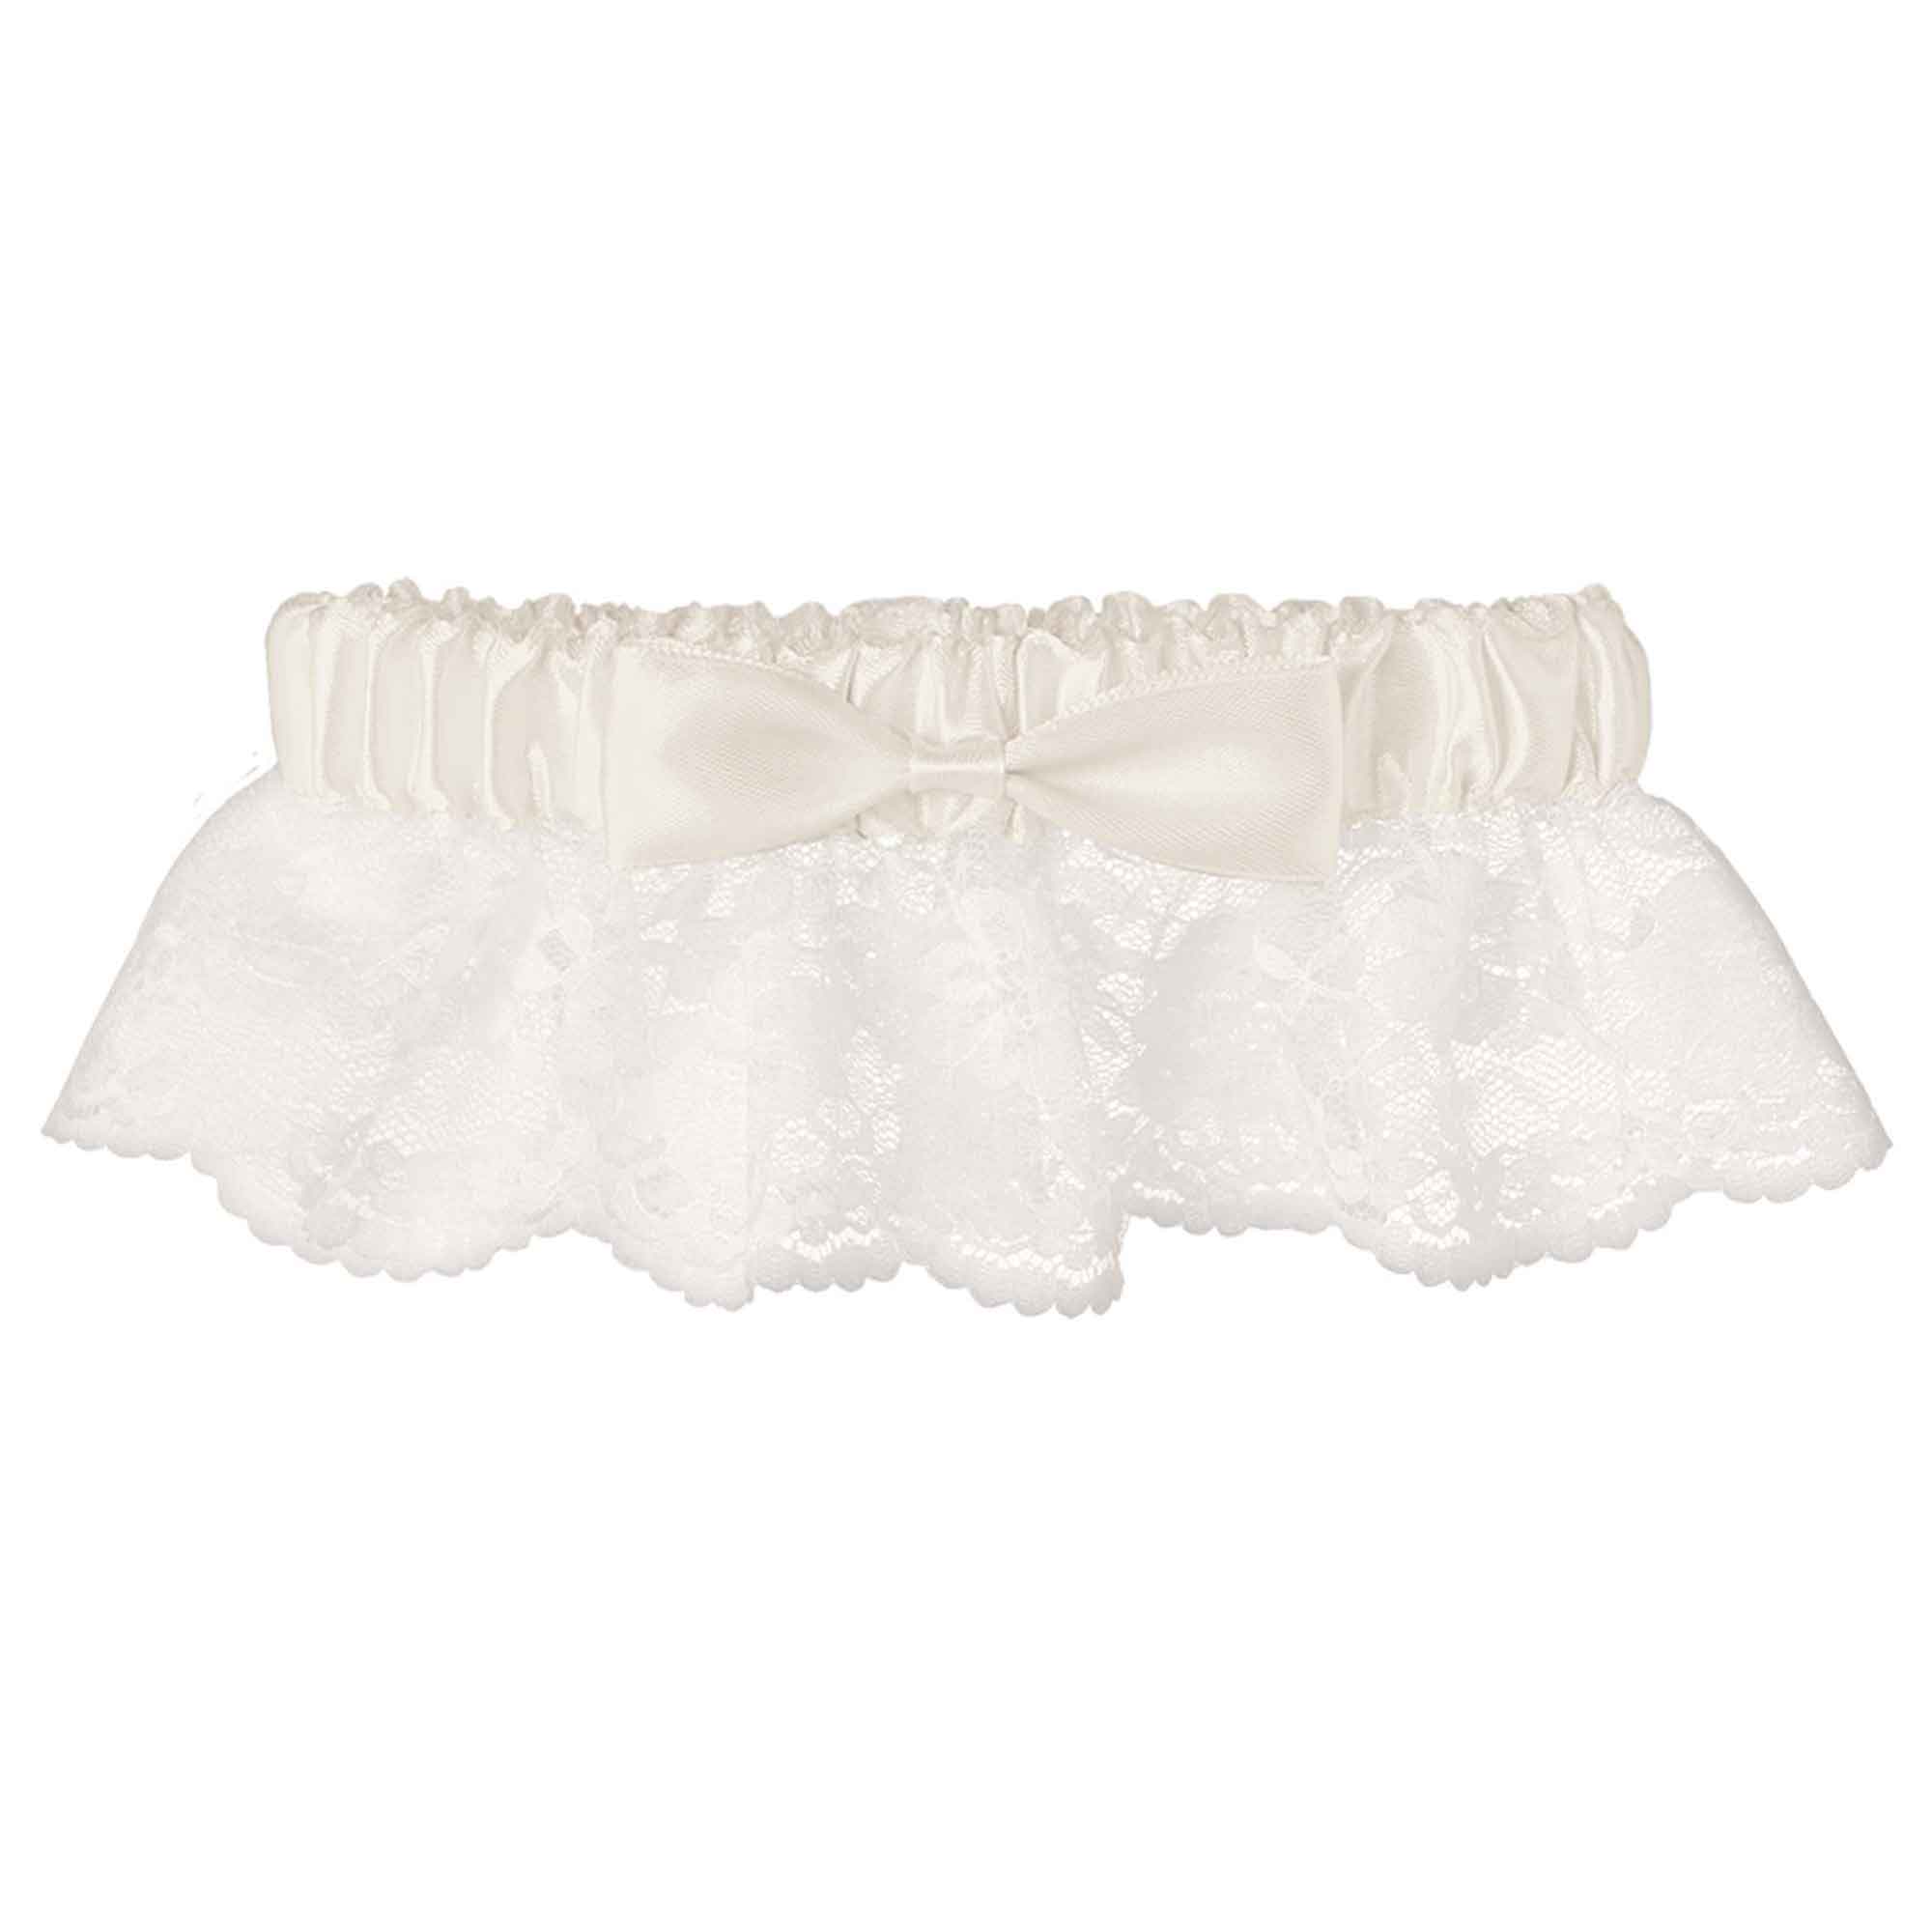 White Garter Lace With Ivory Ribbon One Size Costumes & Apparel - Party Centre